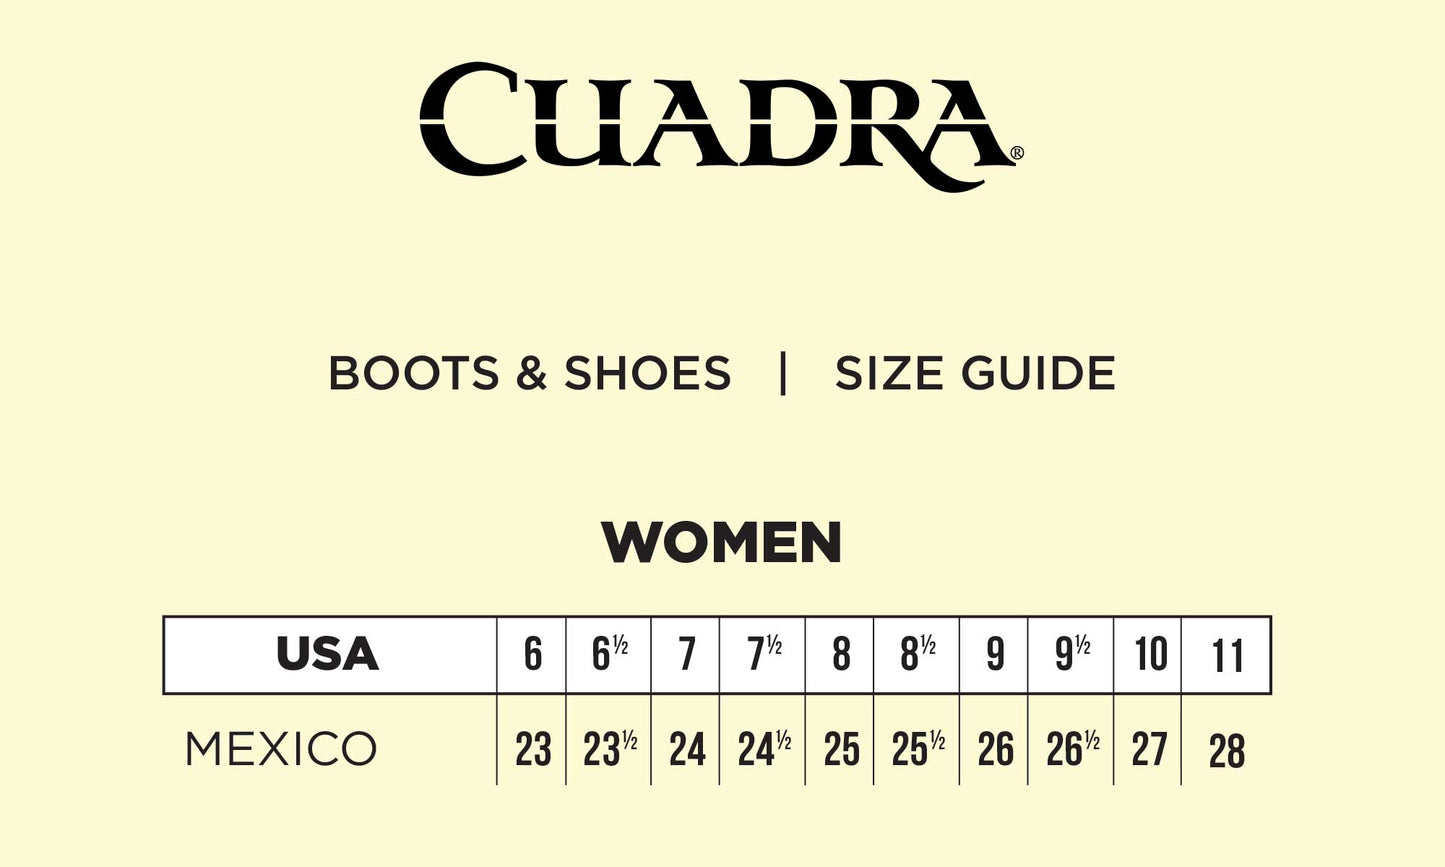 Boot size guide